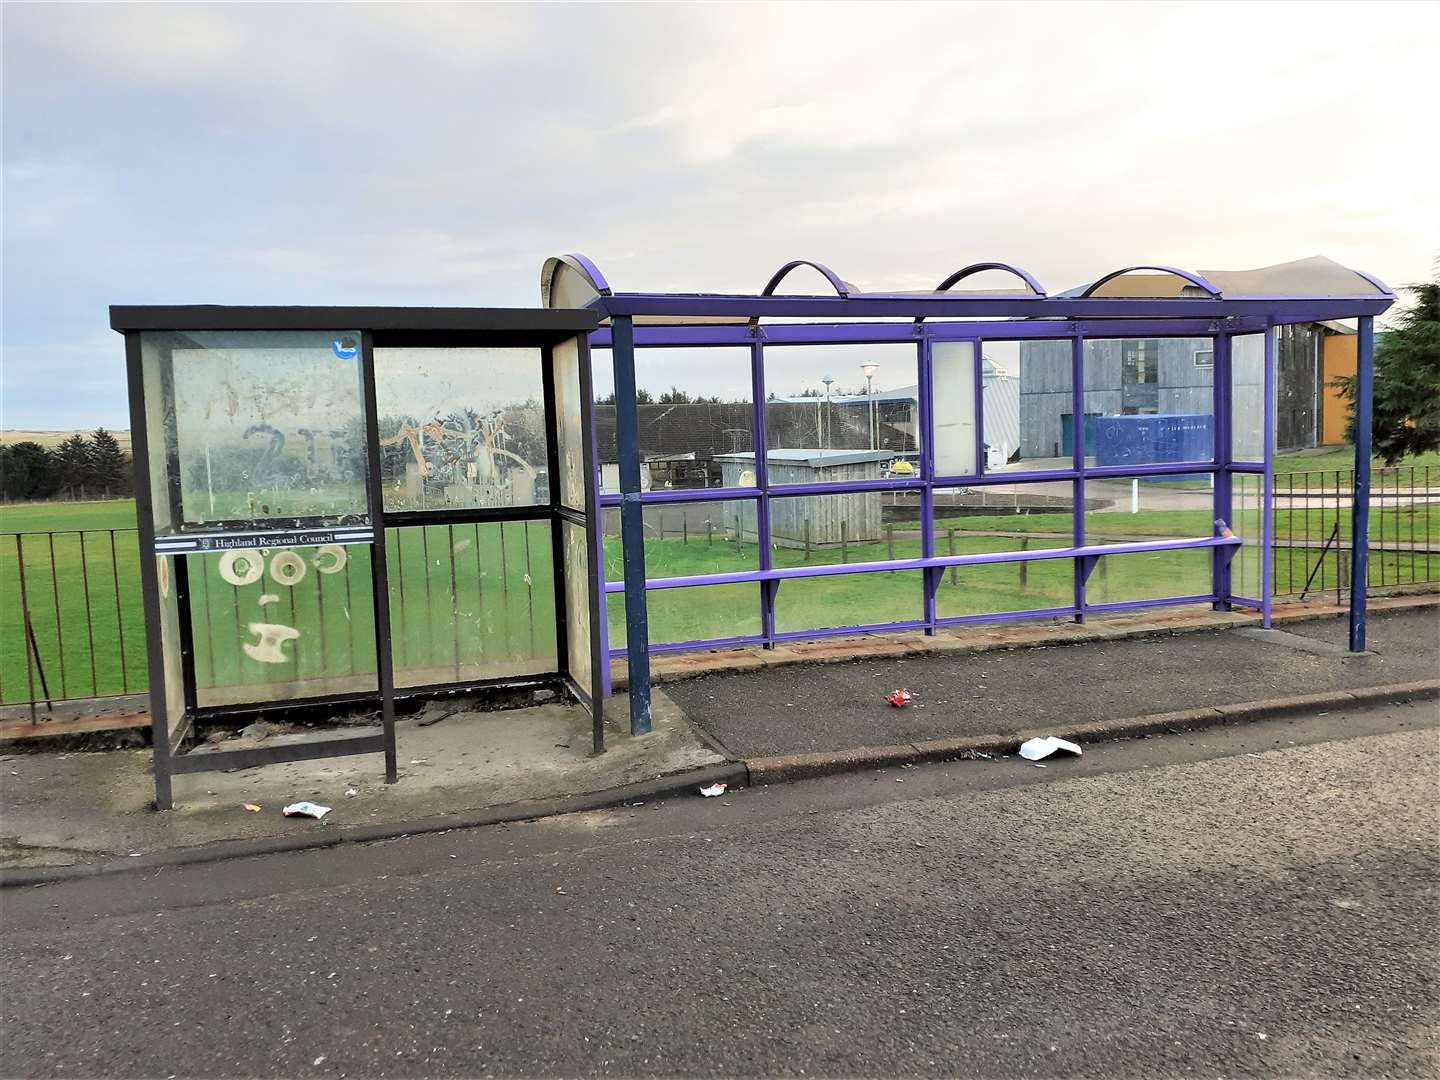 Bus shelter at North Highland College that Mr Glasgow highlighted as in need of refurbishment.